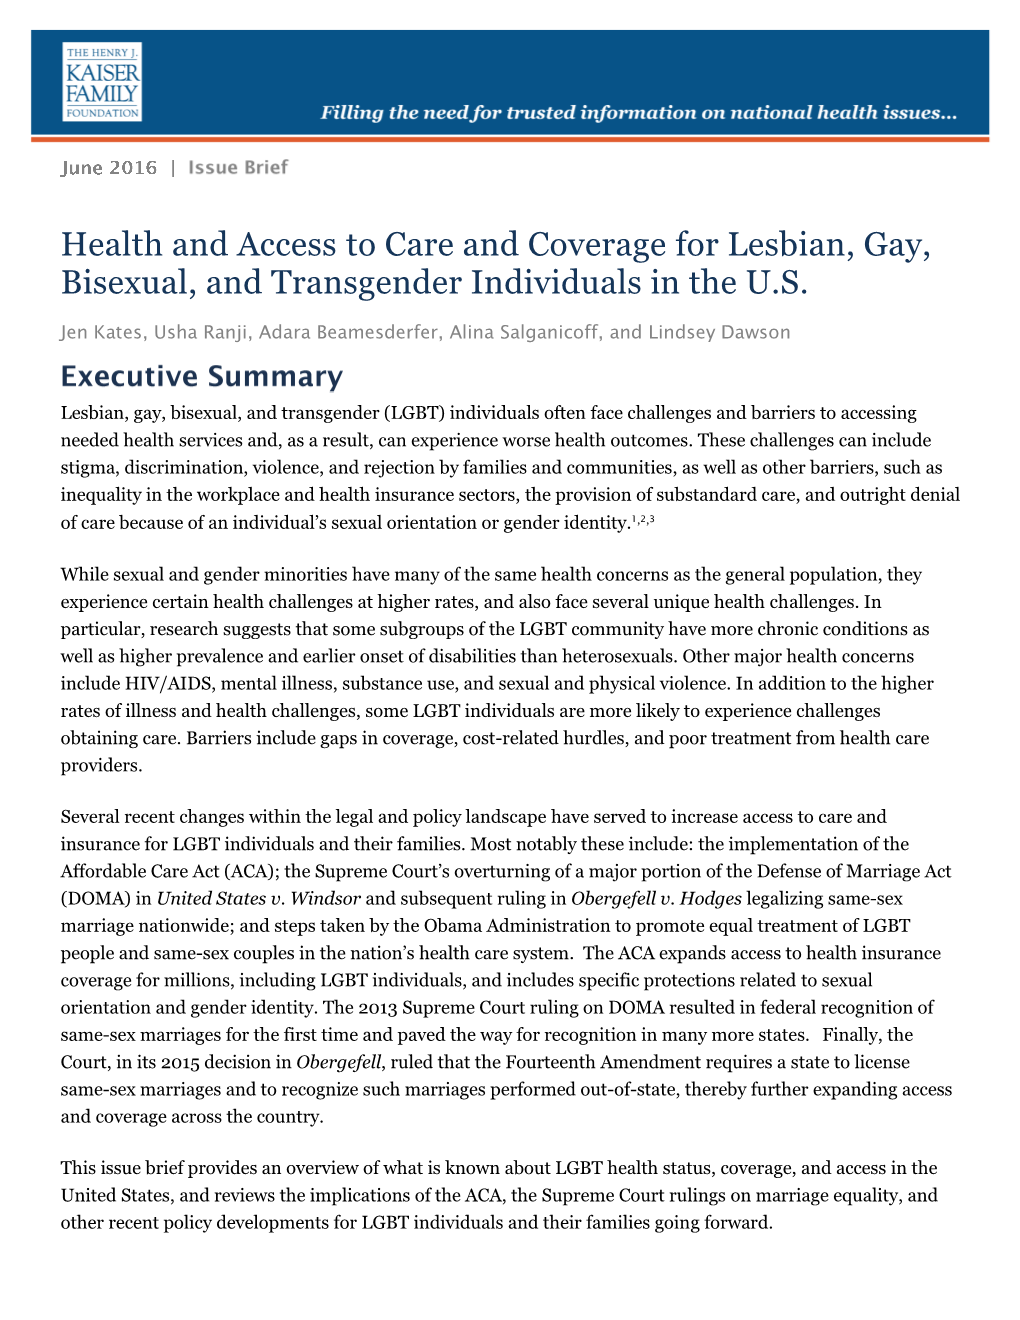 Health and Access to Care and Coverage for LGBT Individuals in the U.S